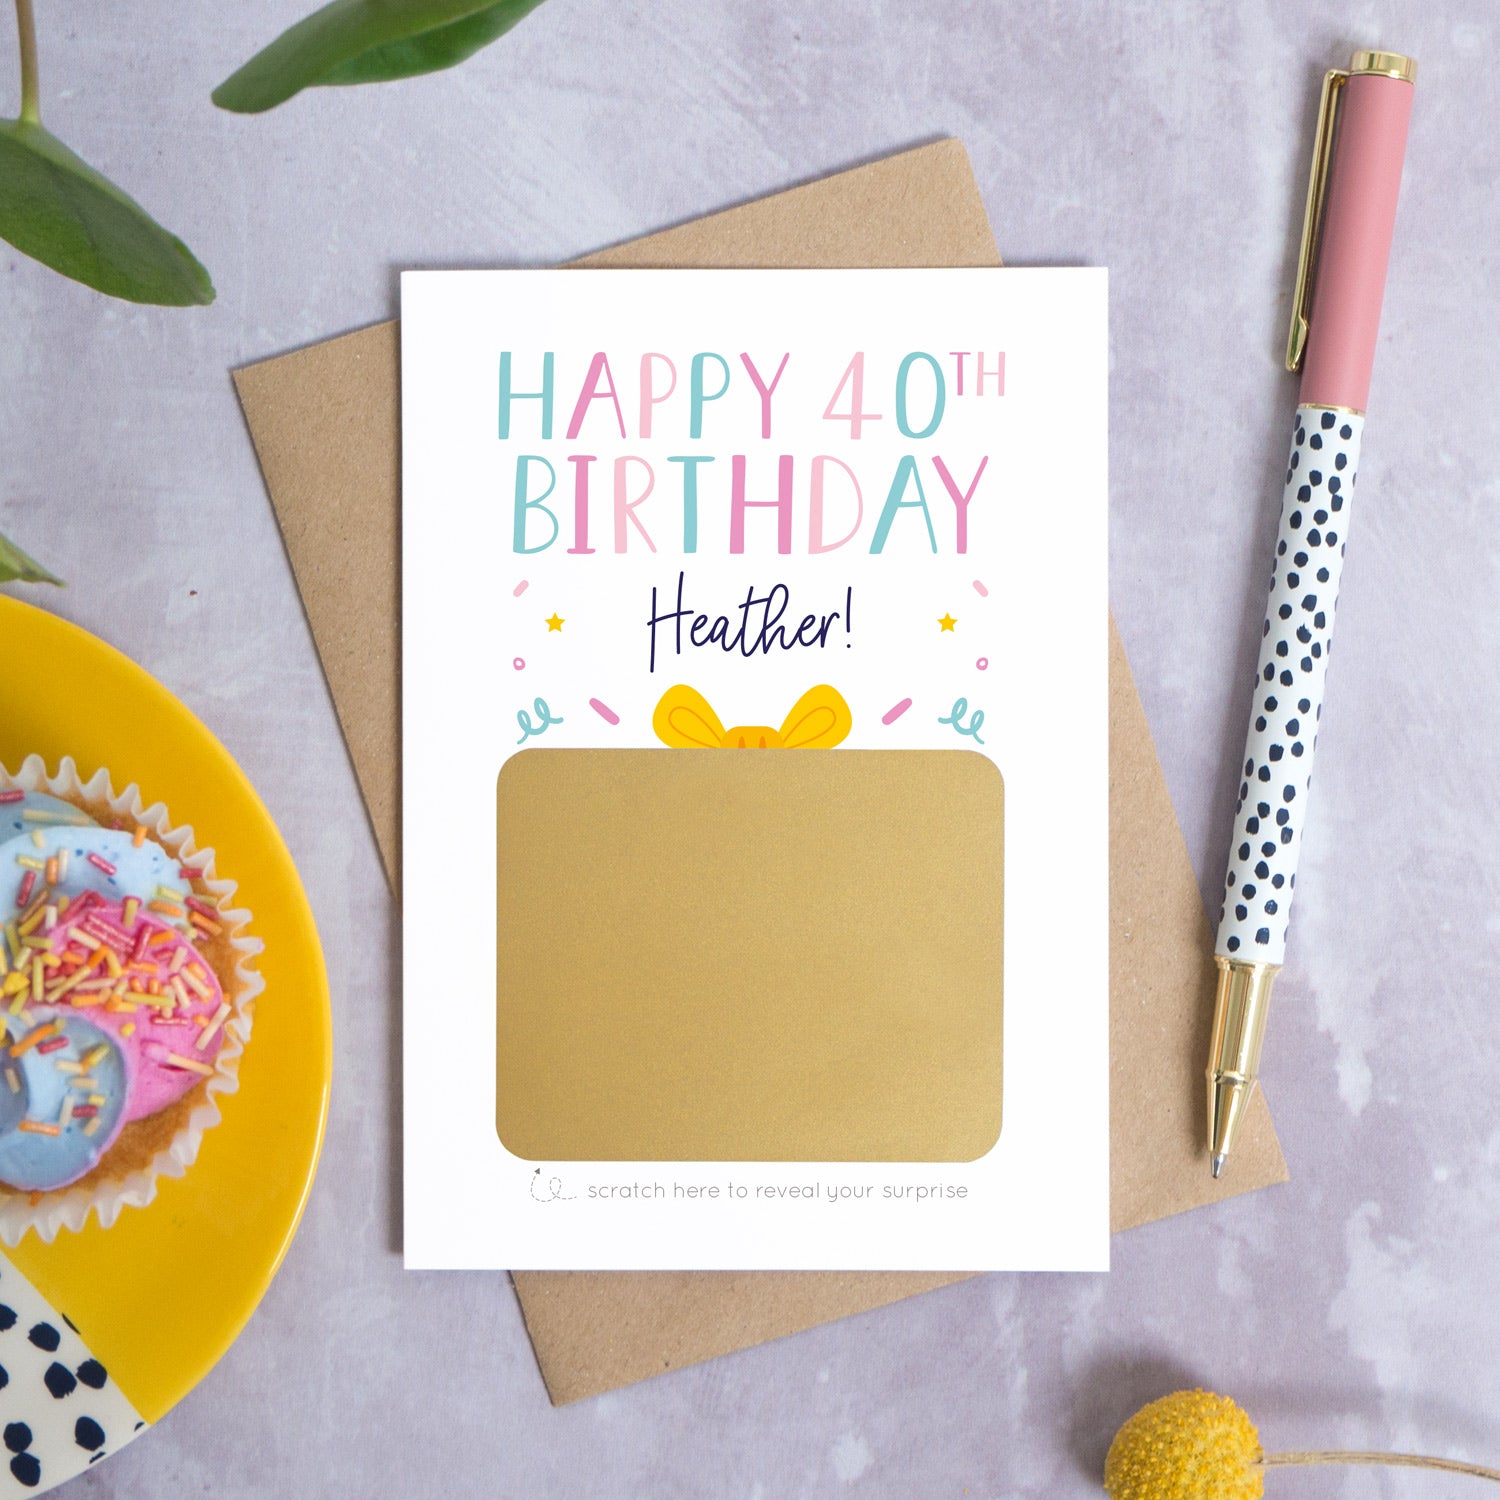 A personalised happy 40th birthday scratch card that has been photographed flat lay style on a grey concrete style background surrounded with foliage, a cupcake and a pen. The card itself shows how it will arrive and looks when it is completely unscratched.